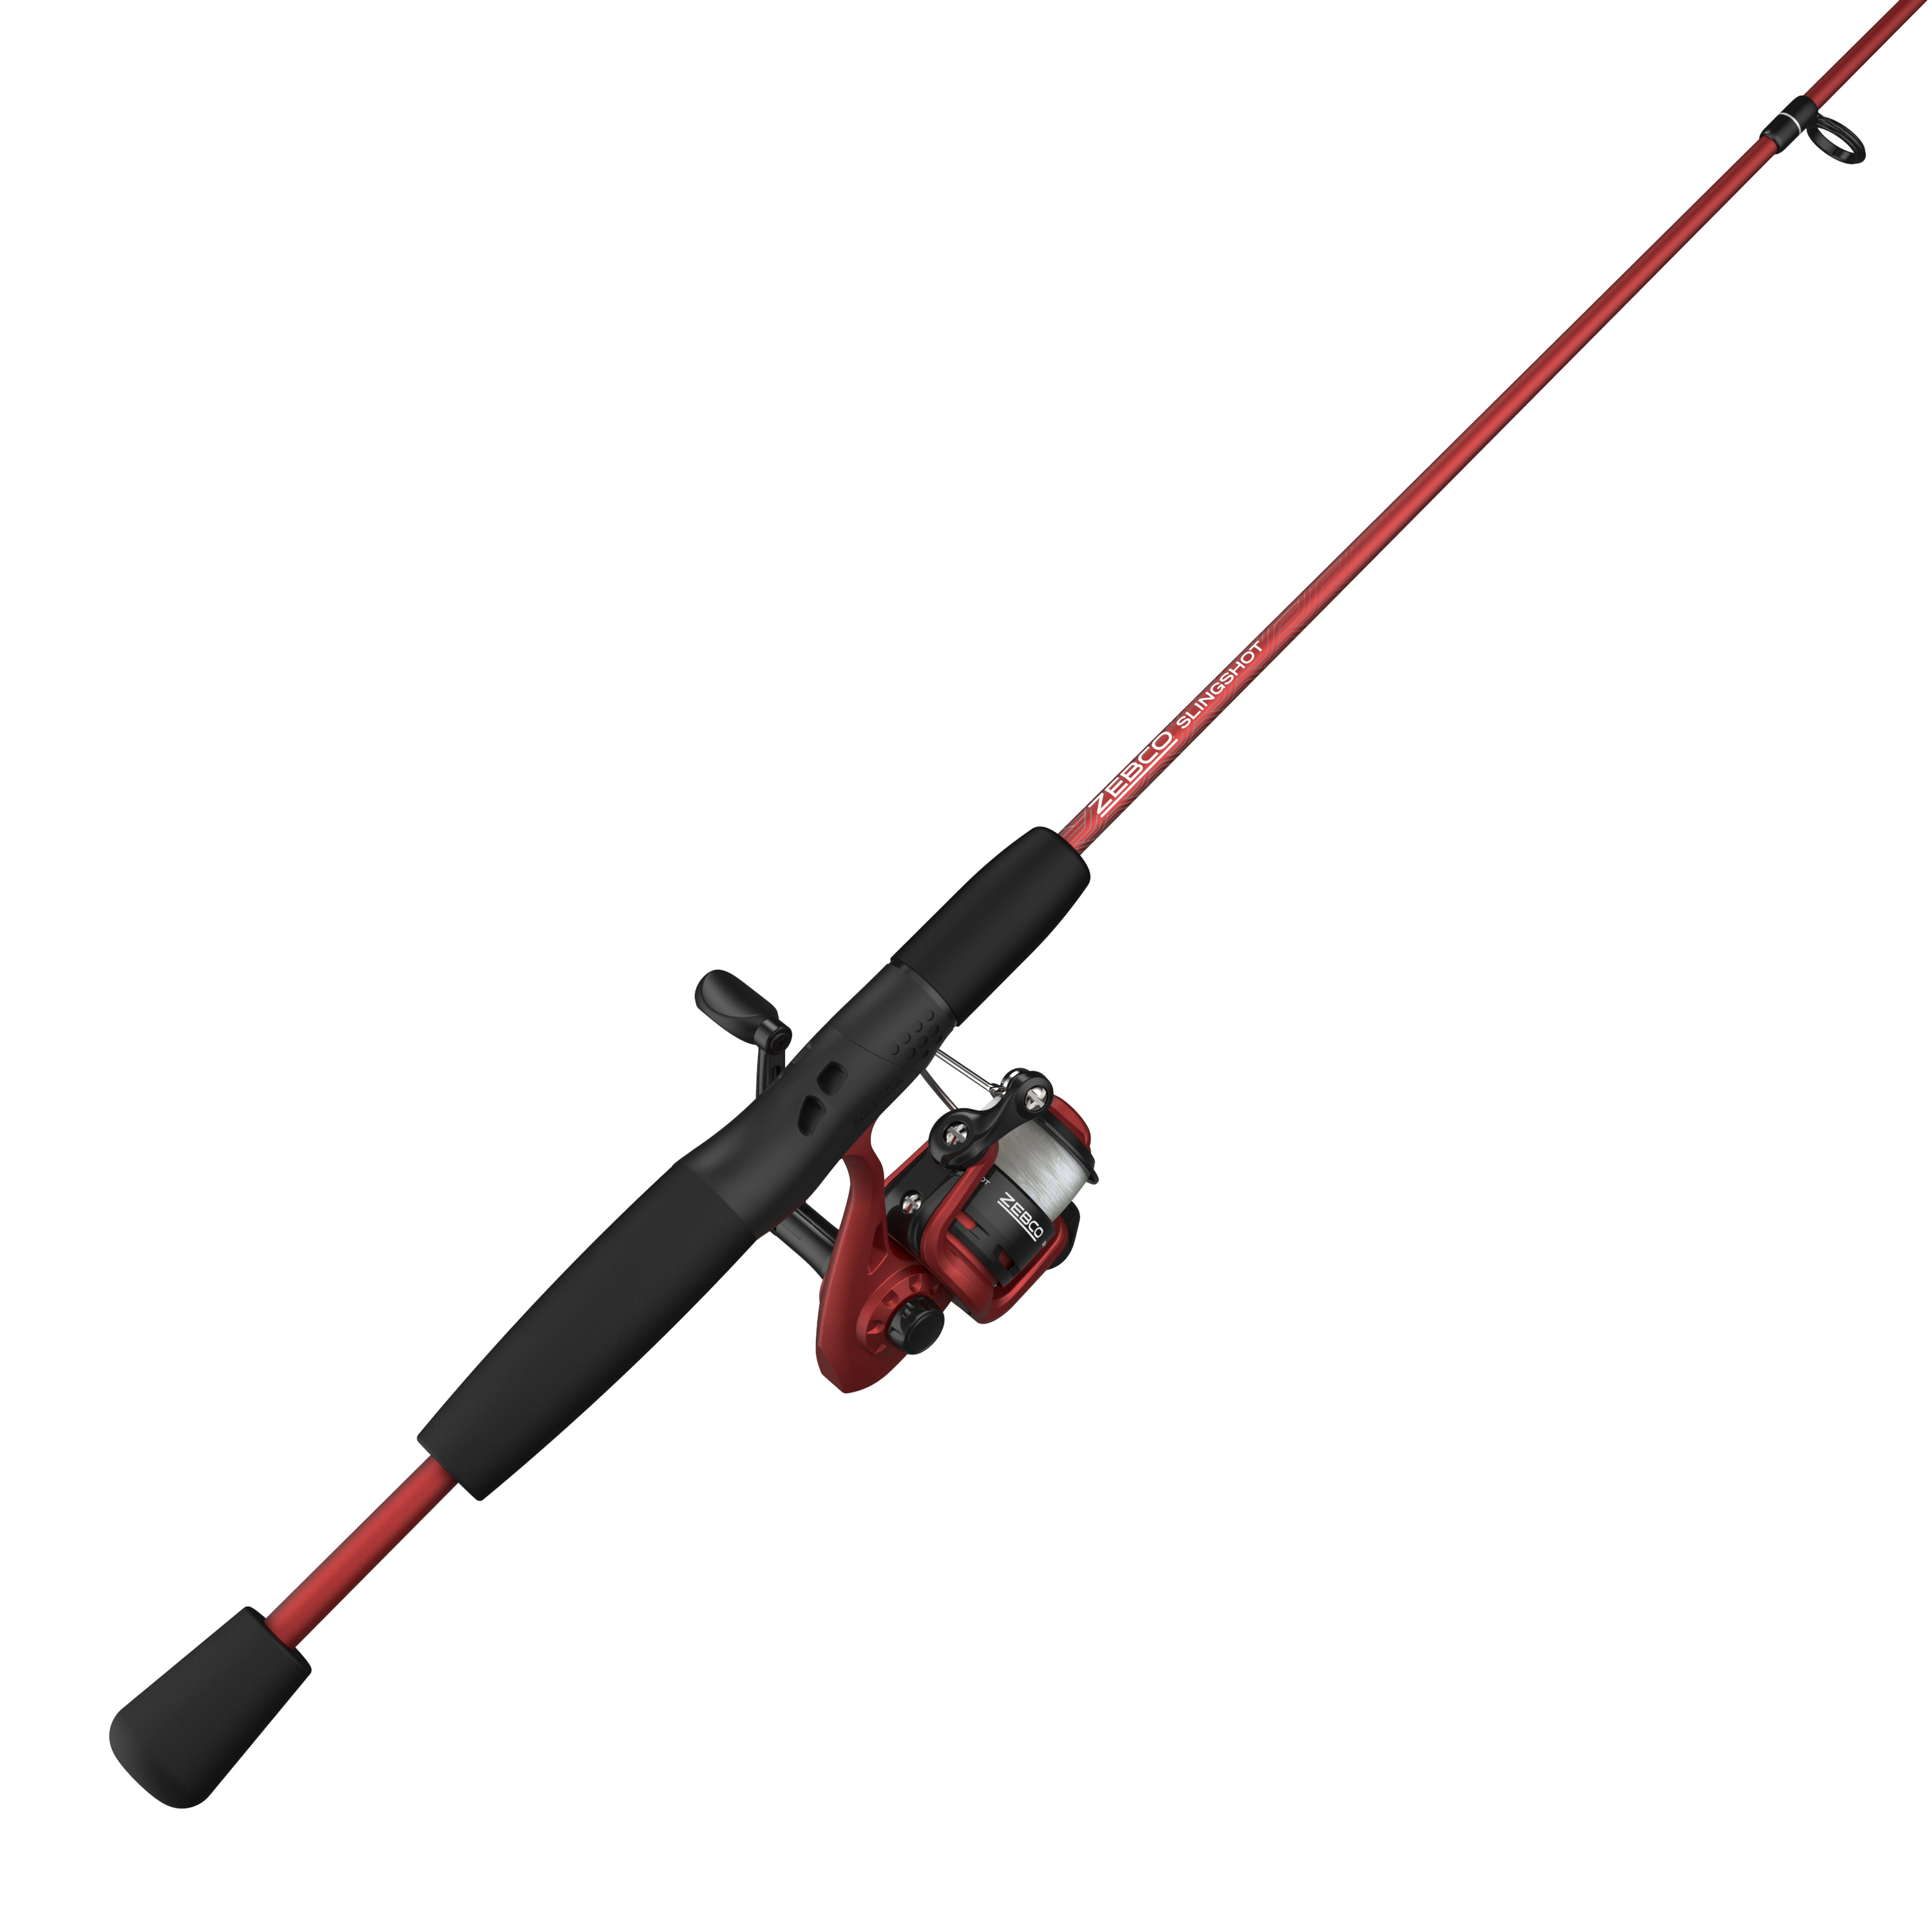 2 Zebco 2-Piece Rods -- 1 Red Rhino Casting & 1 Graphite Series spinning rod